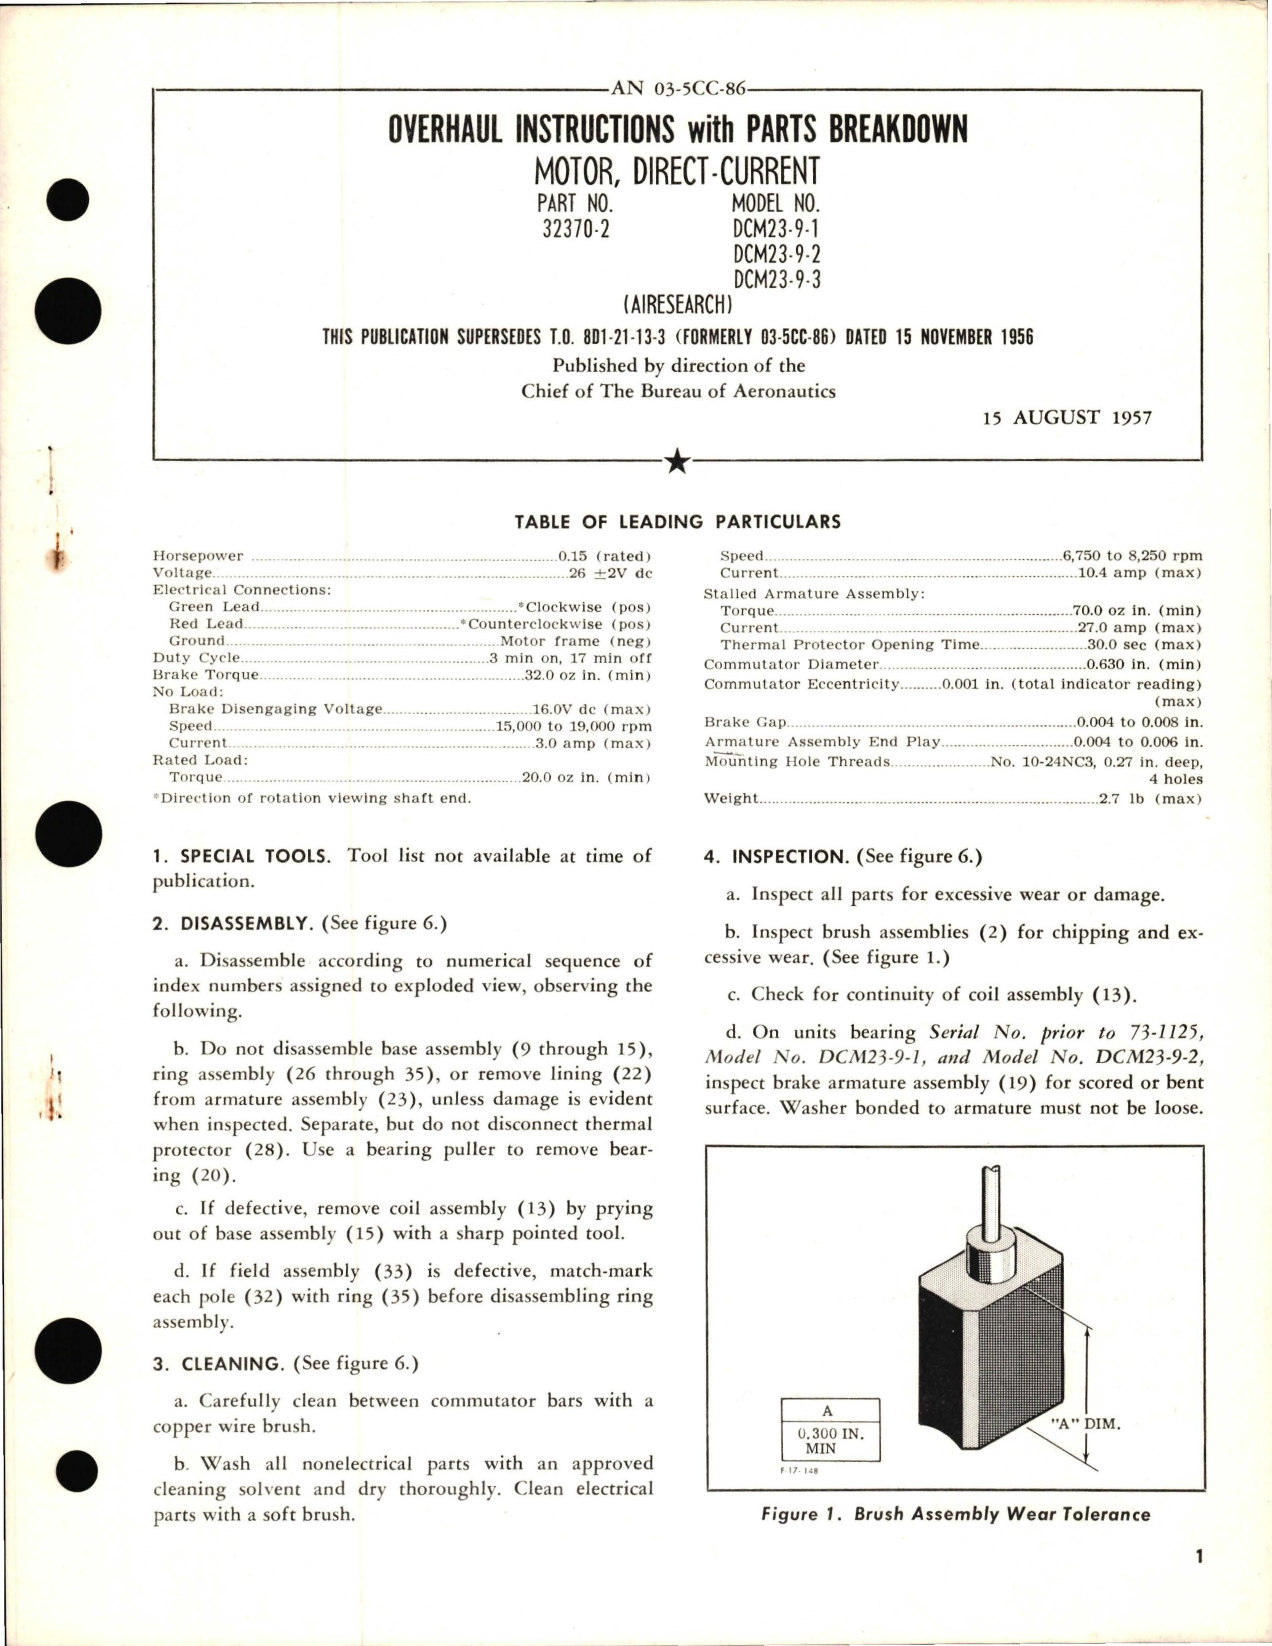 Sample page 1 from AirCorps Library document: Overhaul Instructions with Parts Breakdown for Motor, Direct Current Part 32370-2